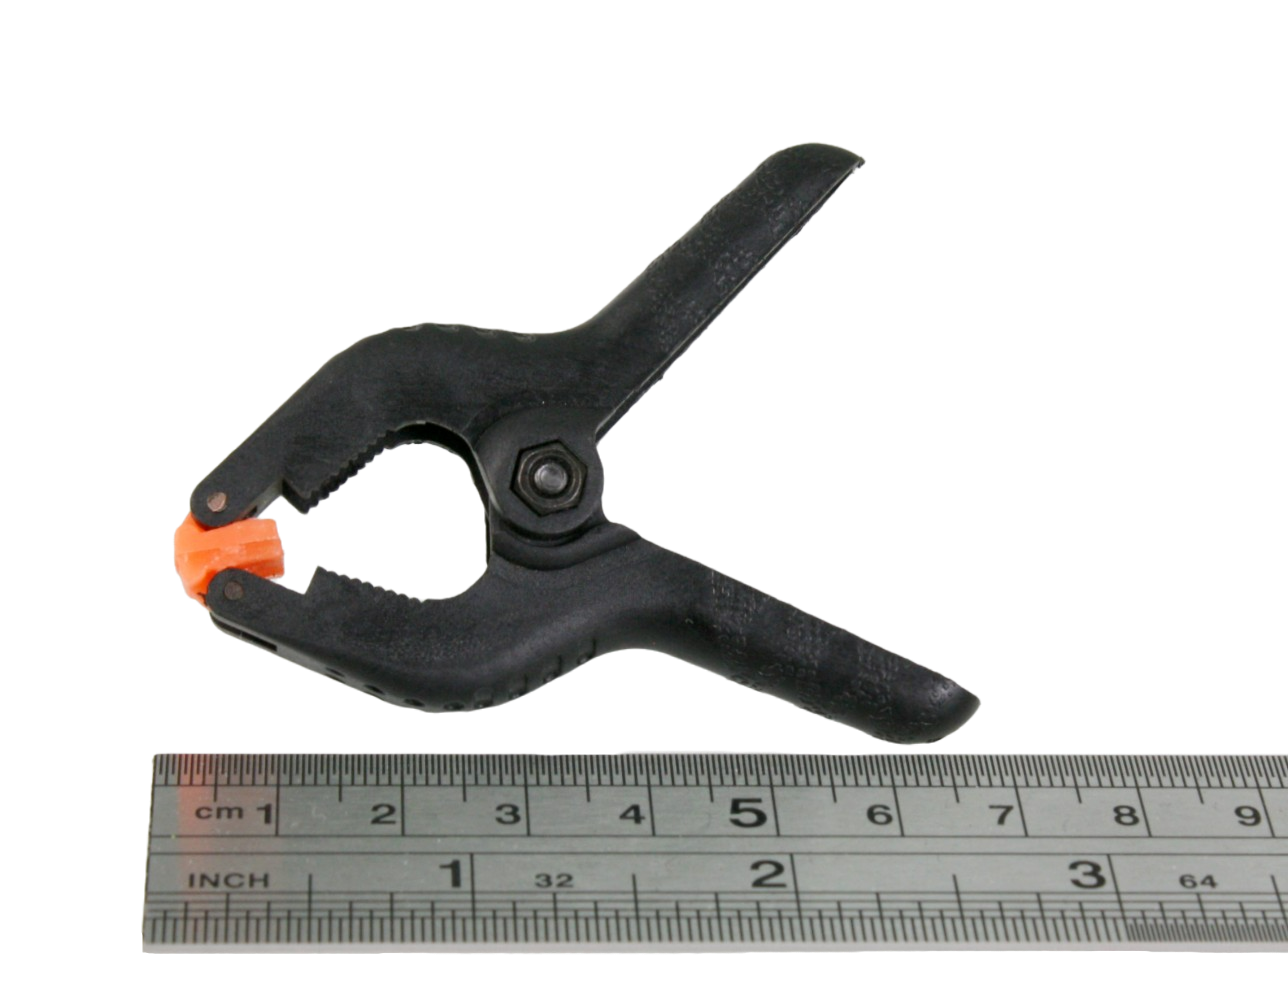 17mm spring clamp, next to a ruler, showing the total length to be just under 7cm